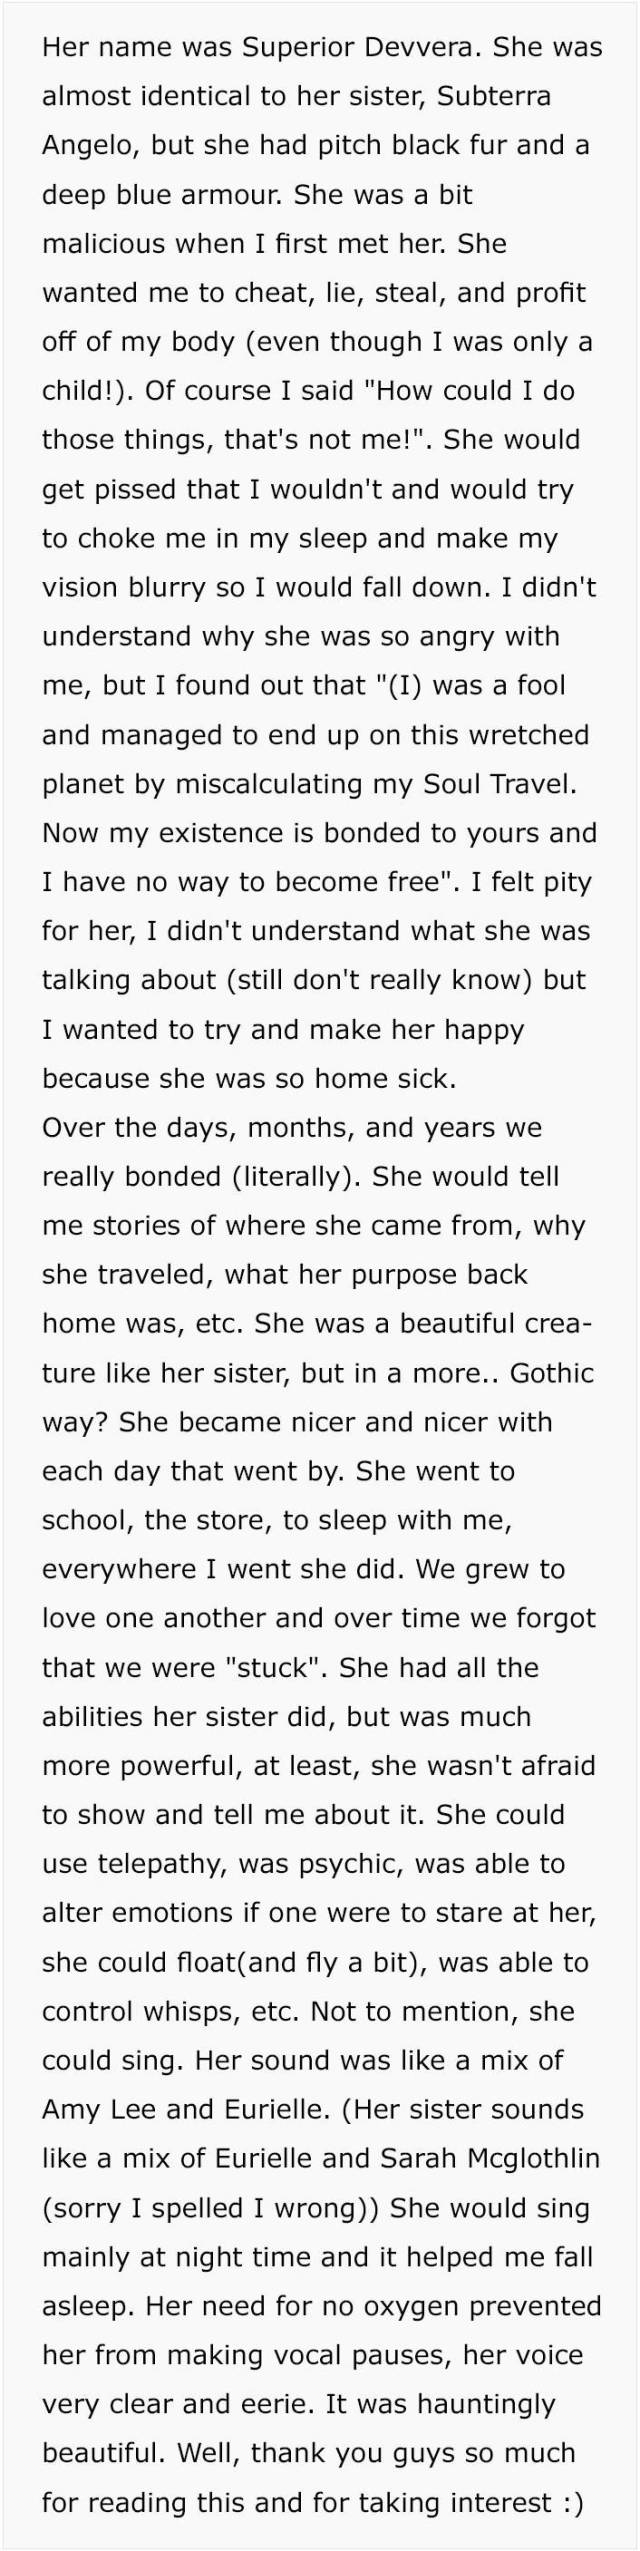 Girl Describes Imaginary Friends She Saw When She Was Young And Who Were Killed By Heavy Medication